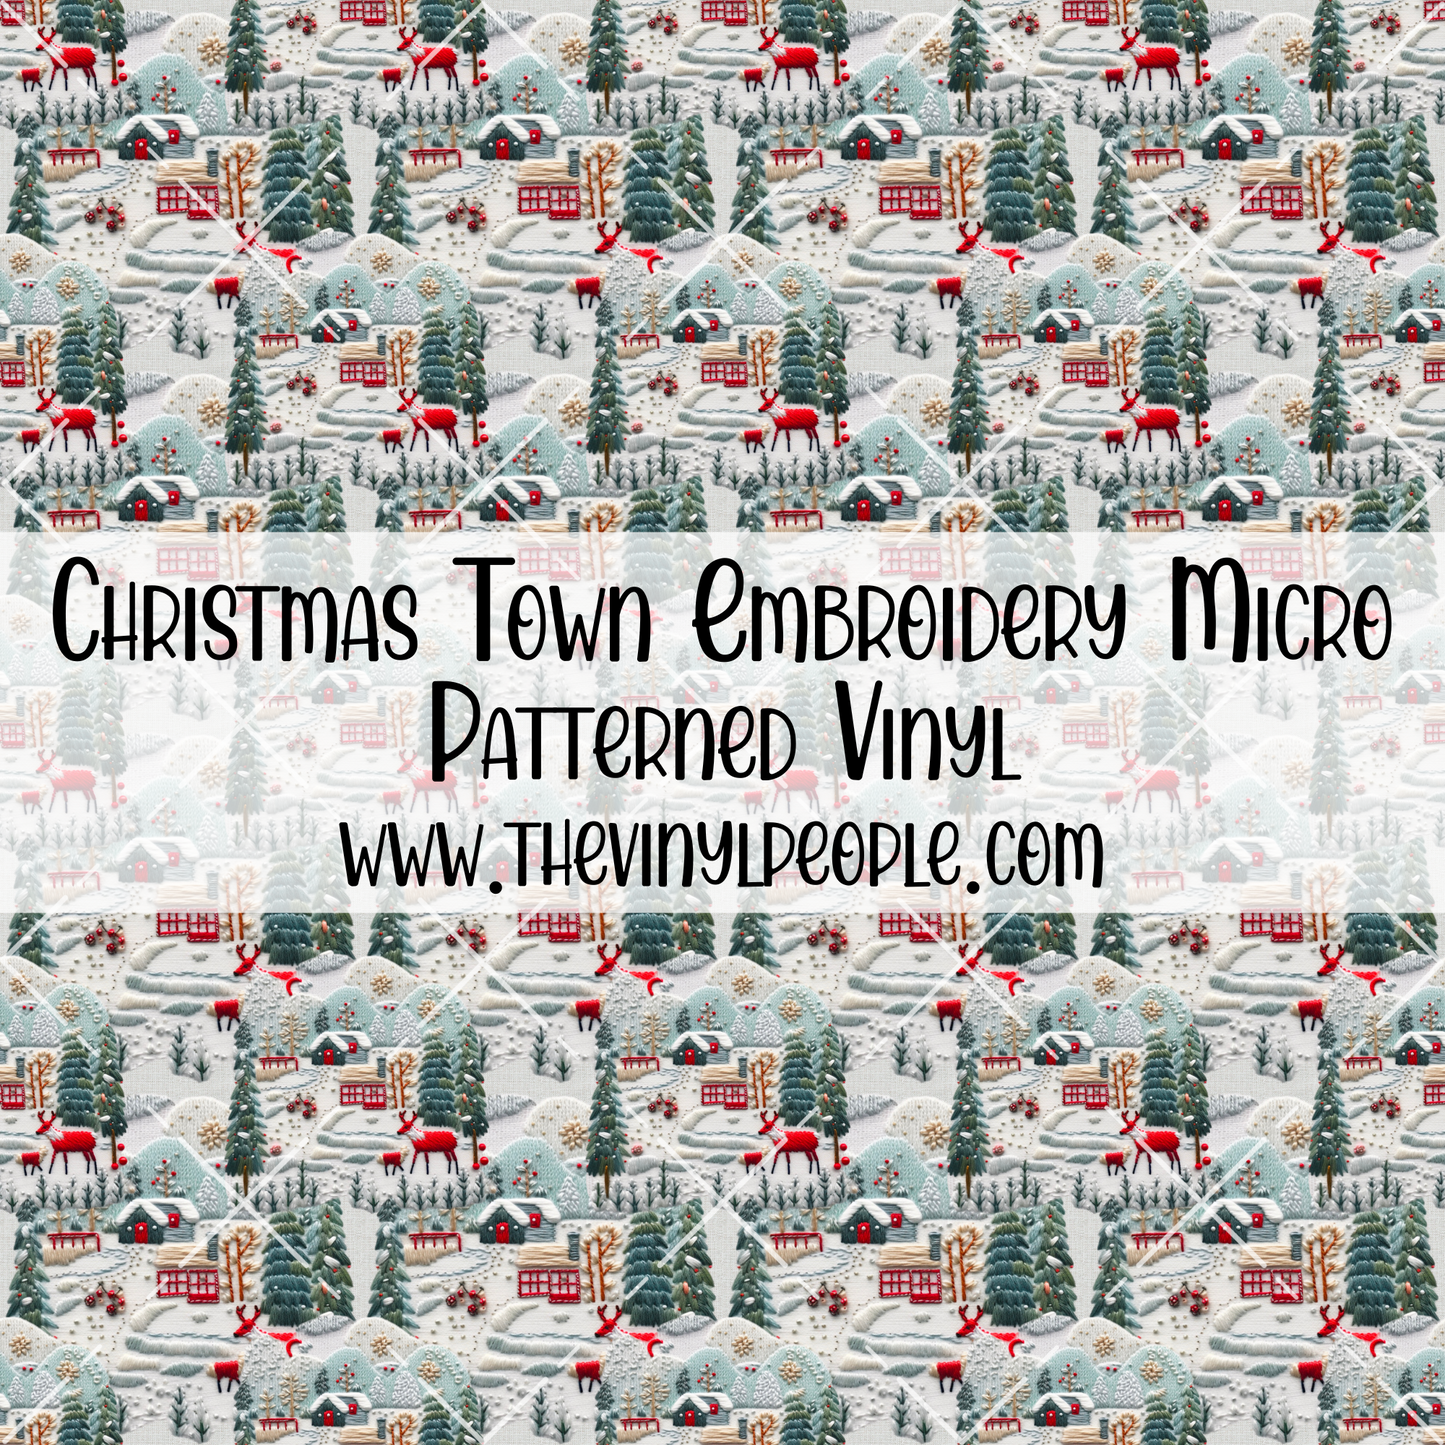 Christmas Town Embroidery Patterned Vinyl